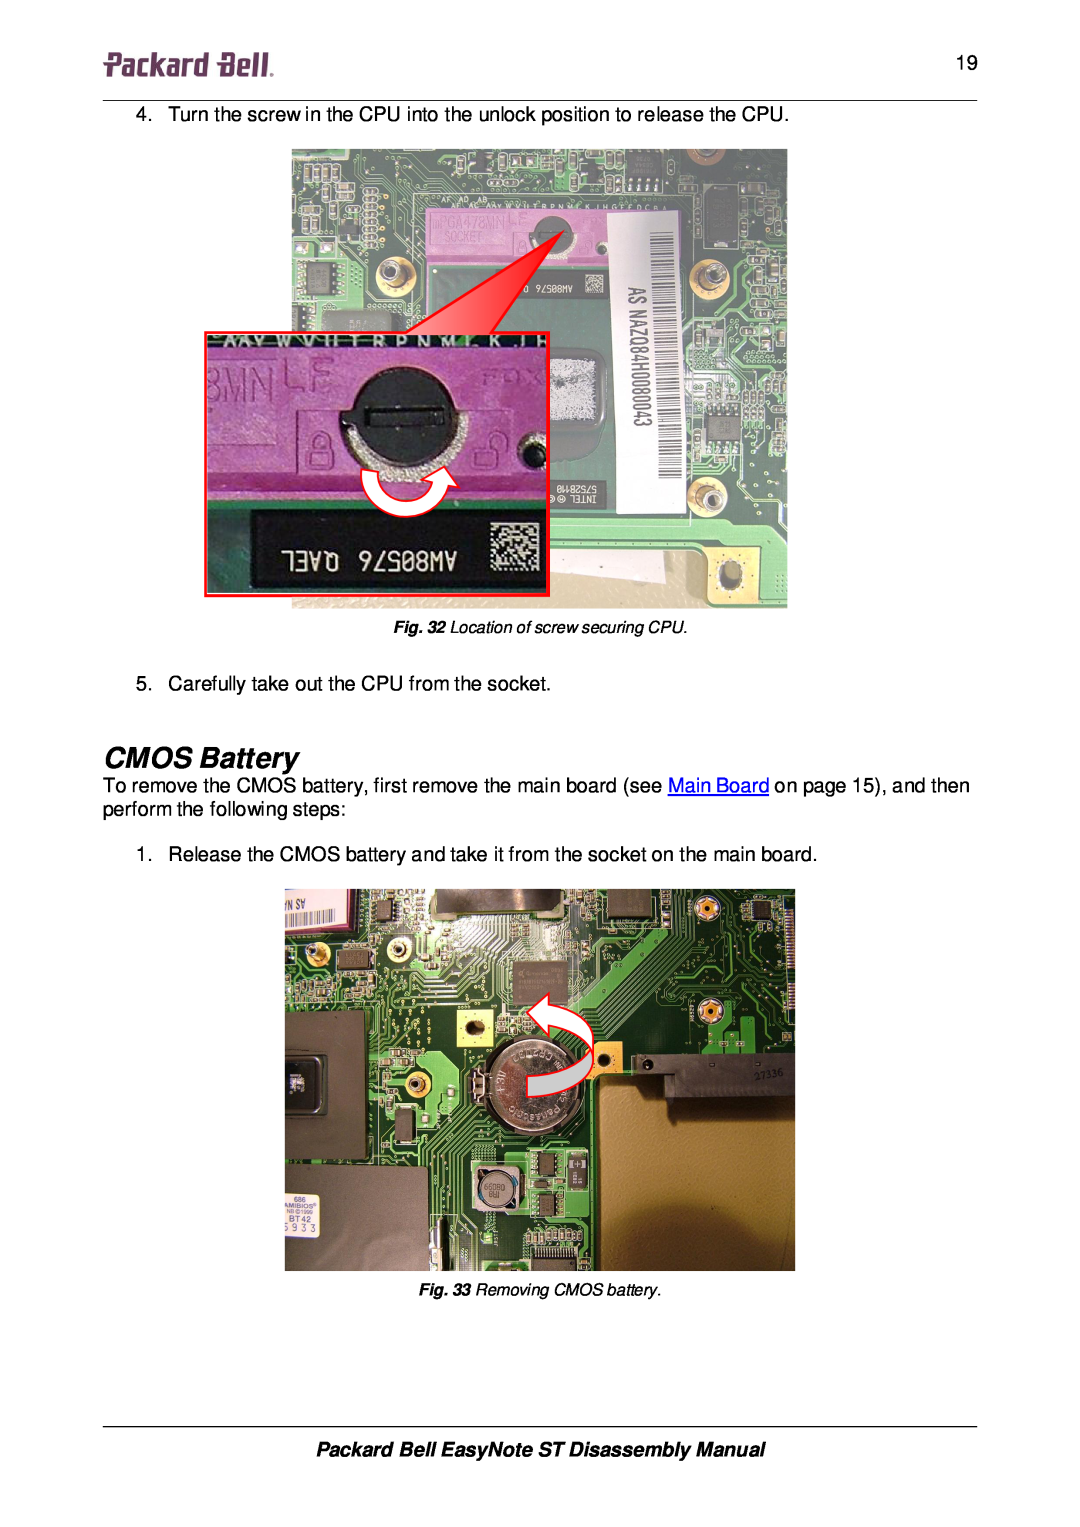 Packard Bell manual CMOS Battery, Packard Bell EasyNote ST Disassembly Manual 